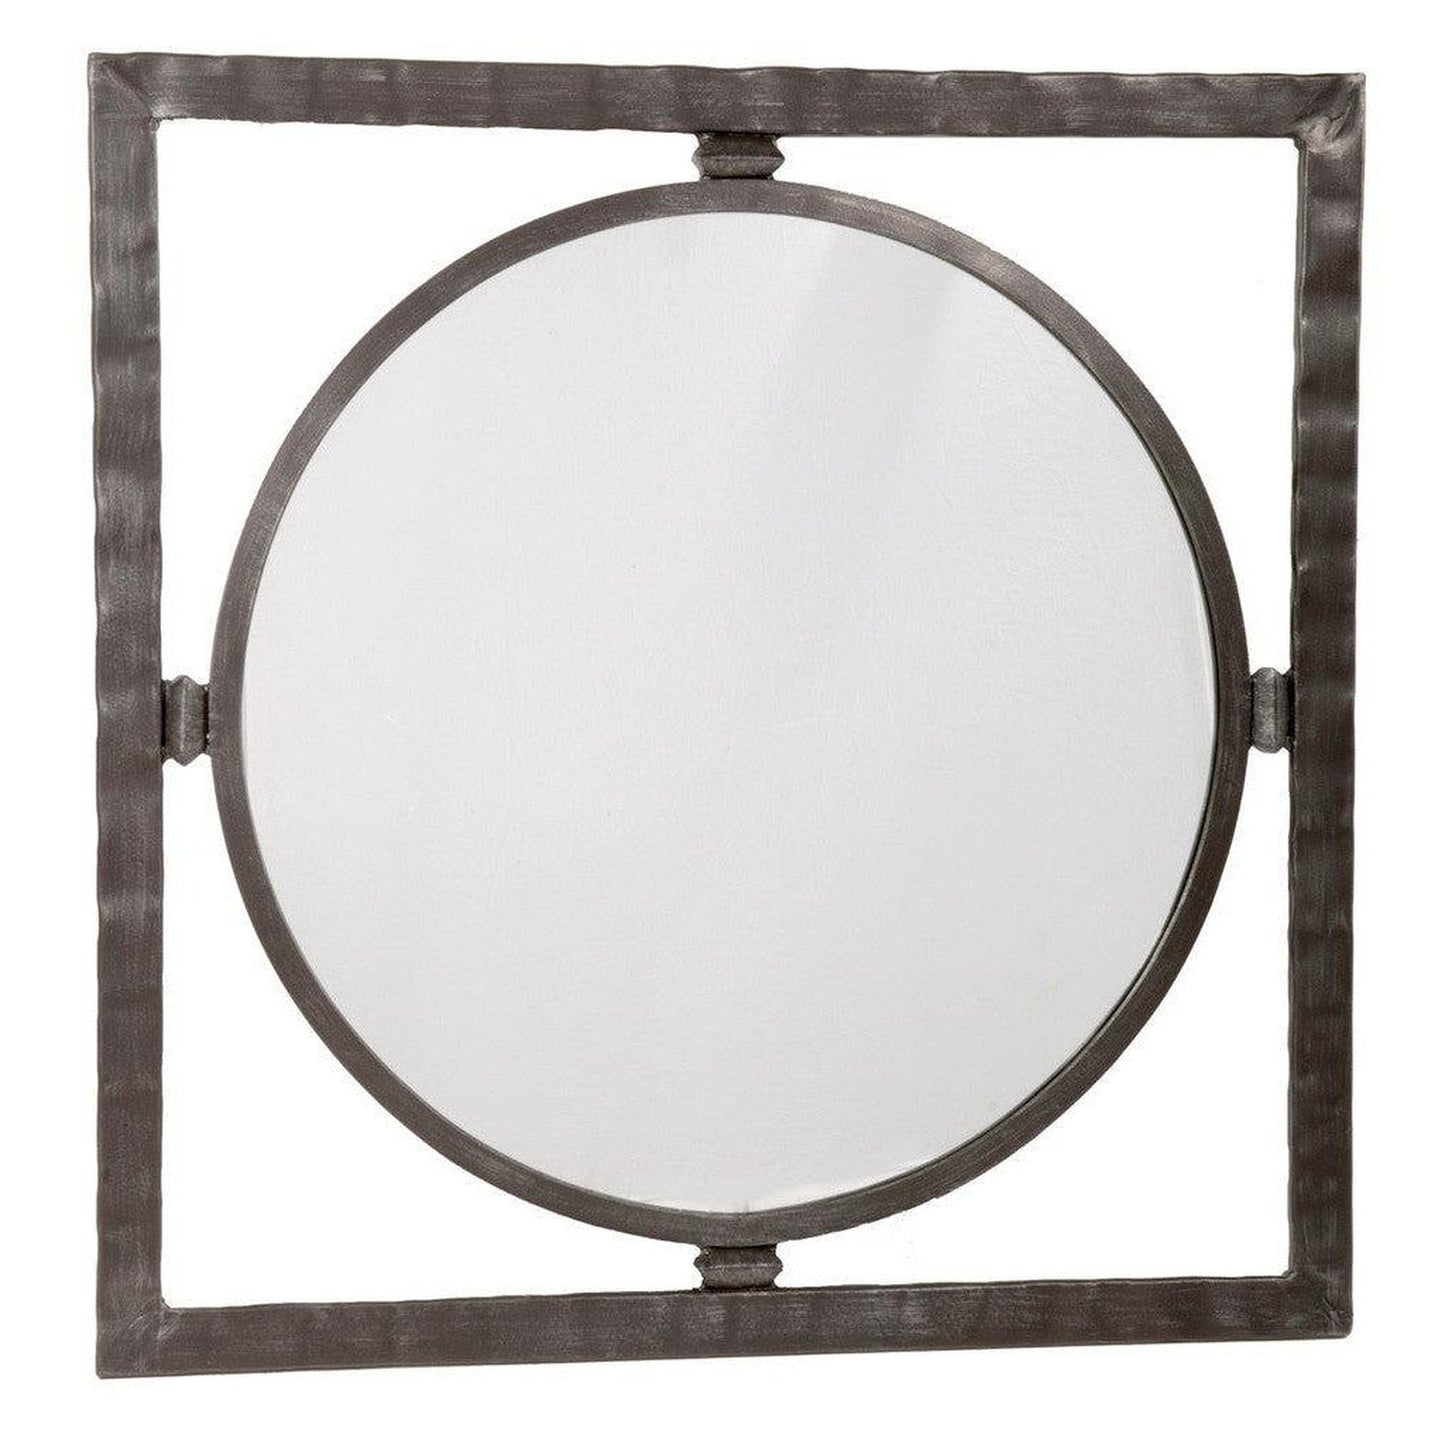 Stone County Ironworks Forest Hill 29" Small Woodland Brown Round Iron Wall Mirror With Copper Iron Accent